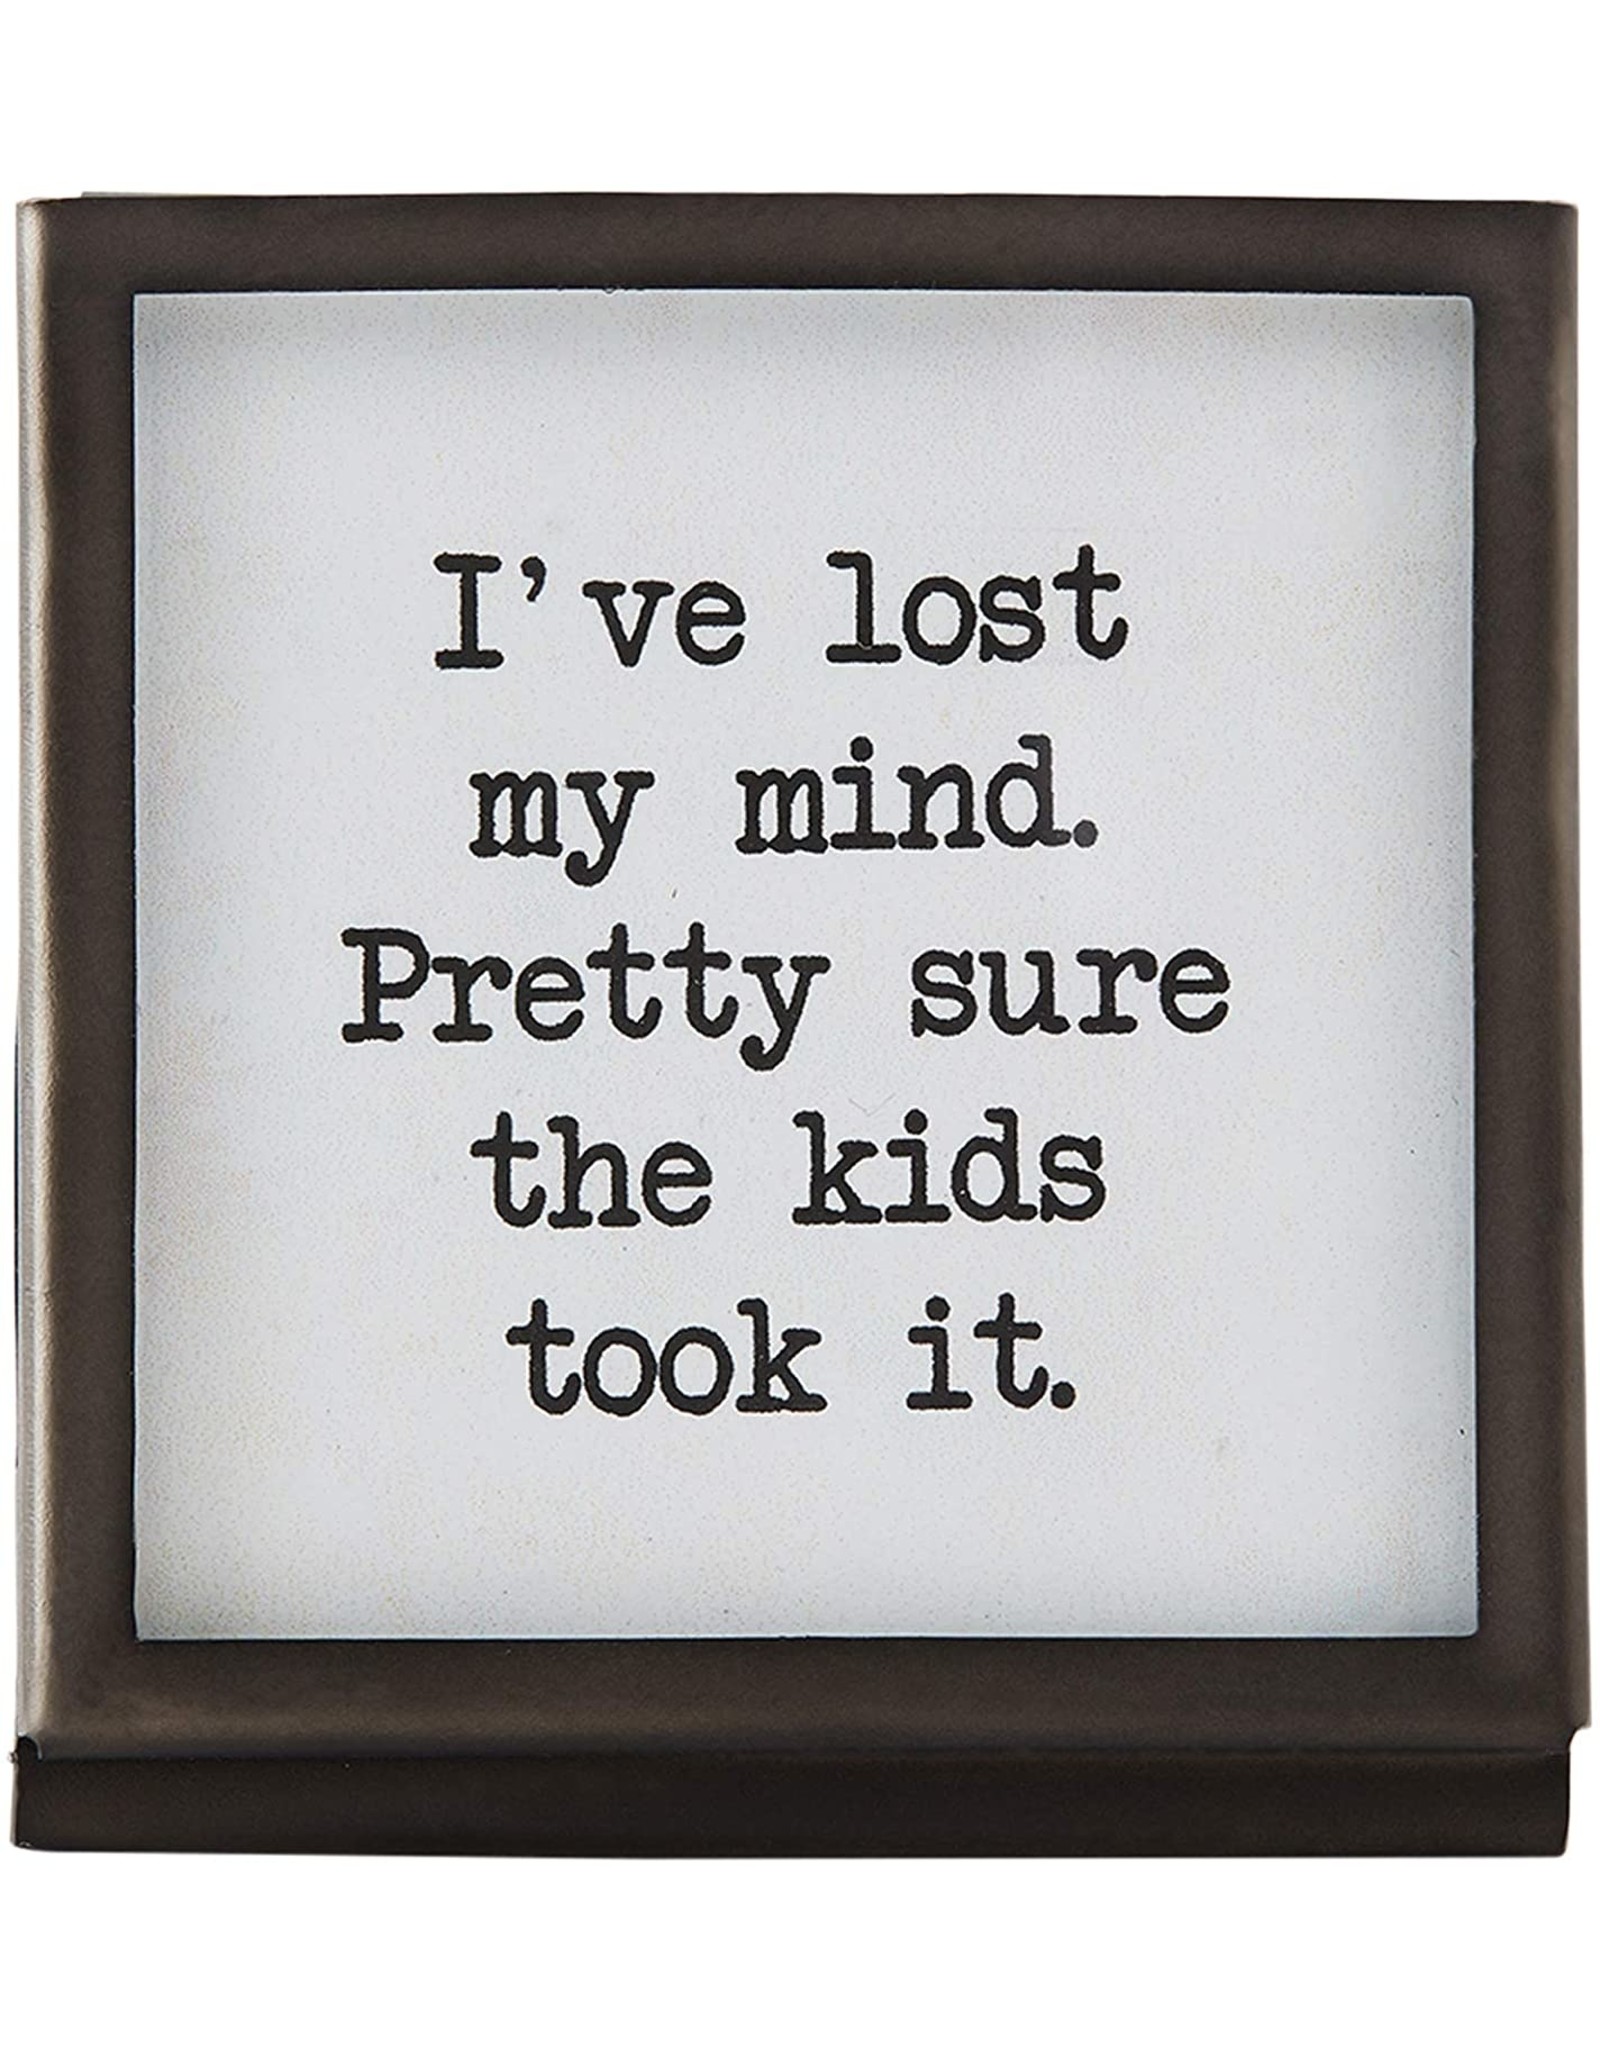 Mud Pie Metal Easel Plaque With Saying Lost My Mind